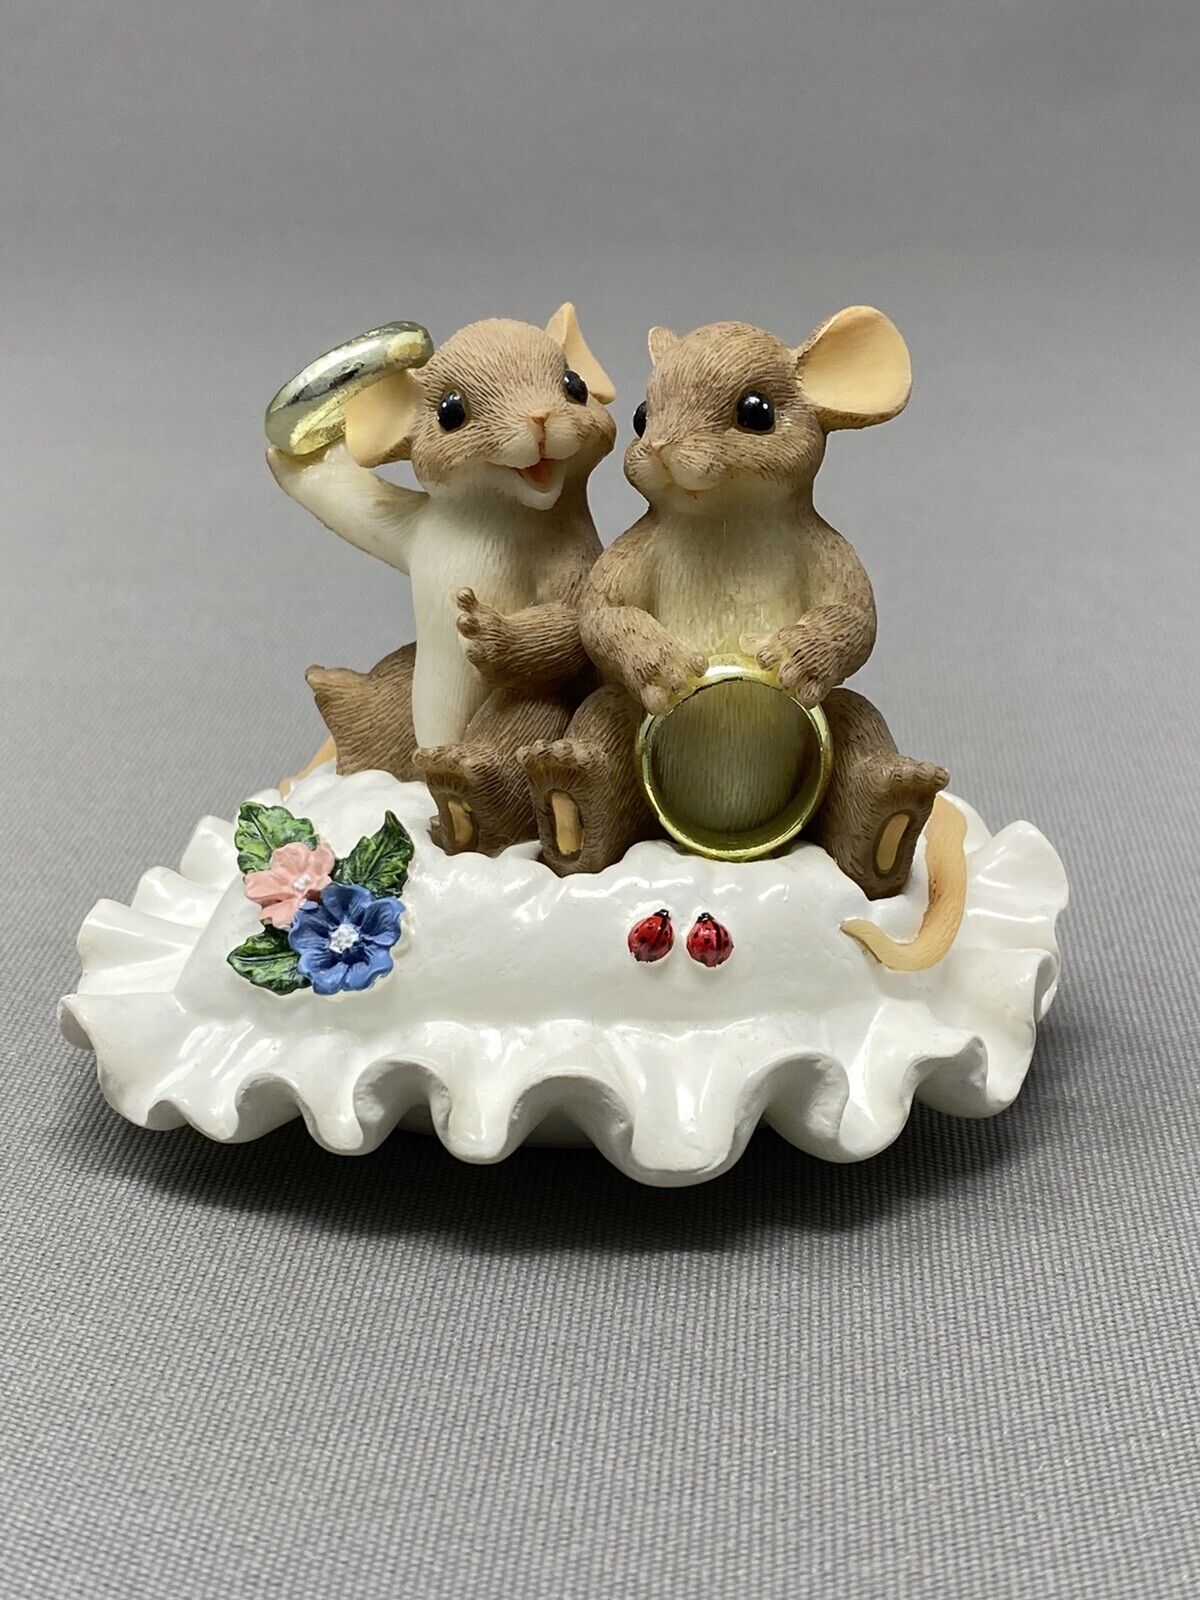 Charming Tails Halo Love 84/150 Fitz And Floyd Wedding Marriage Mice 2005